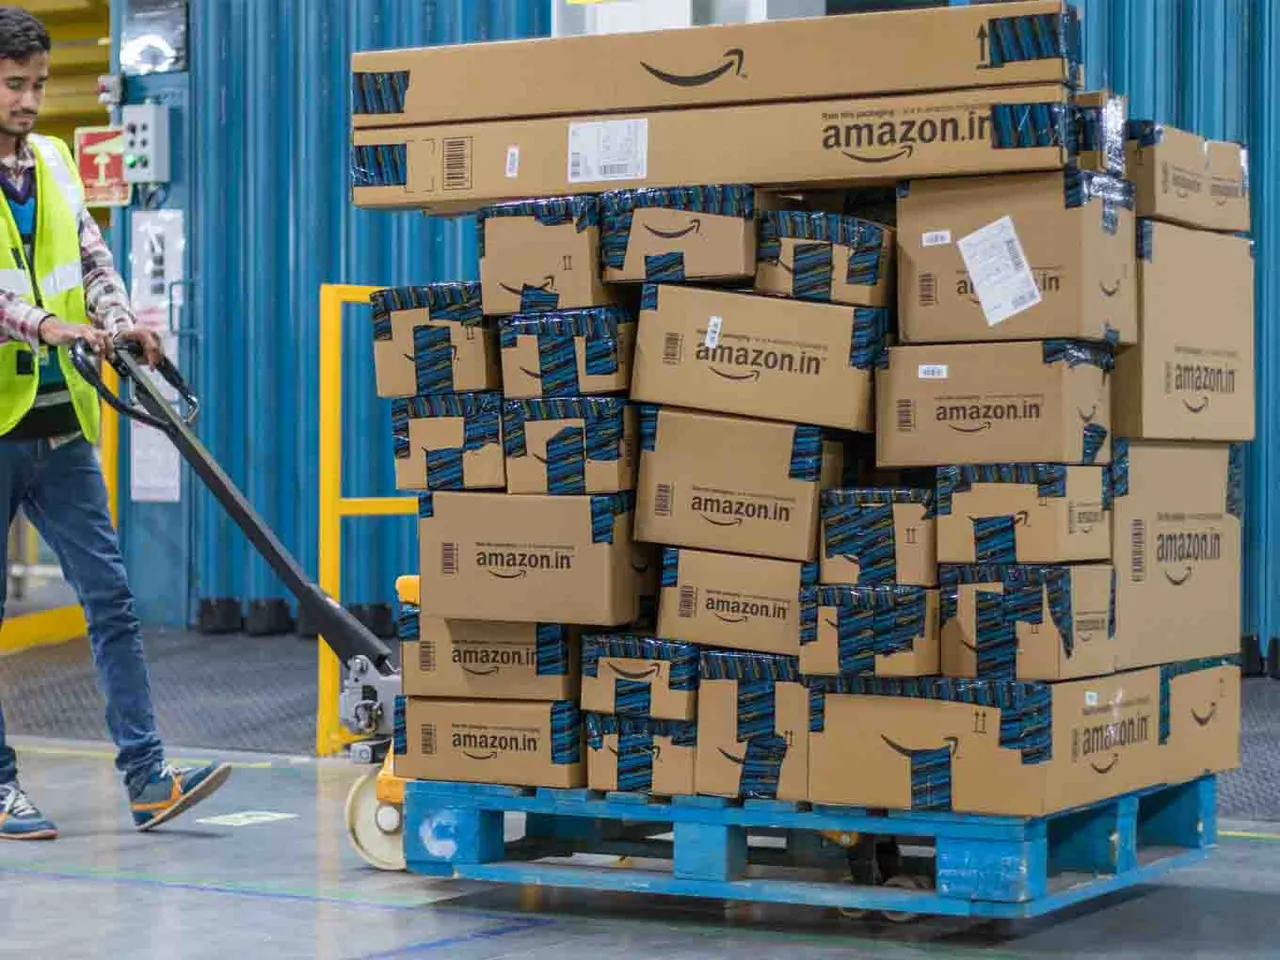 Ahead of Prime Day, Amazon announces increase in storage capacity by 40%